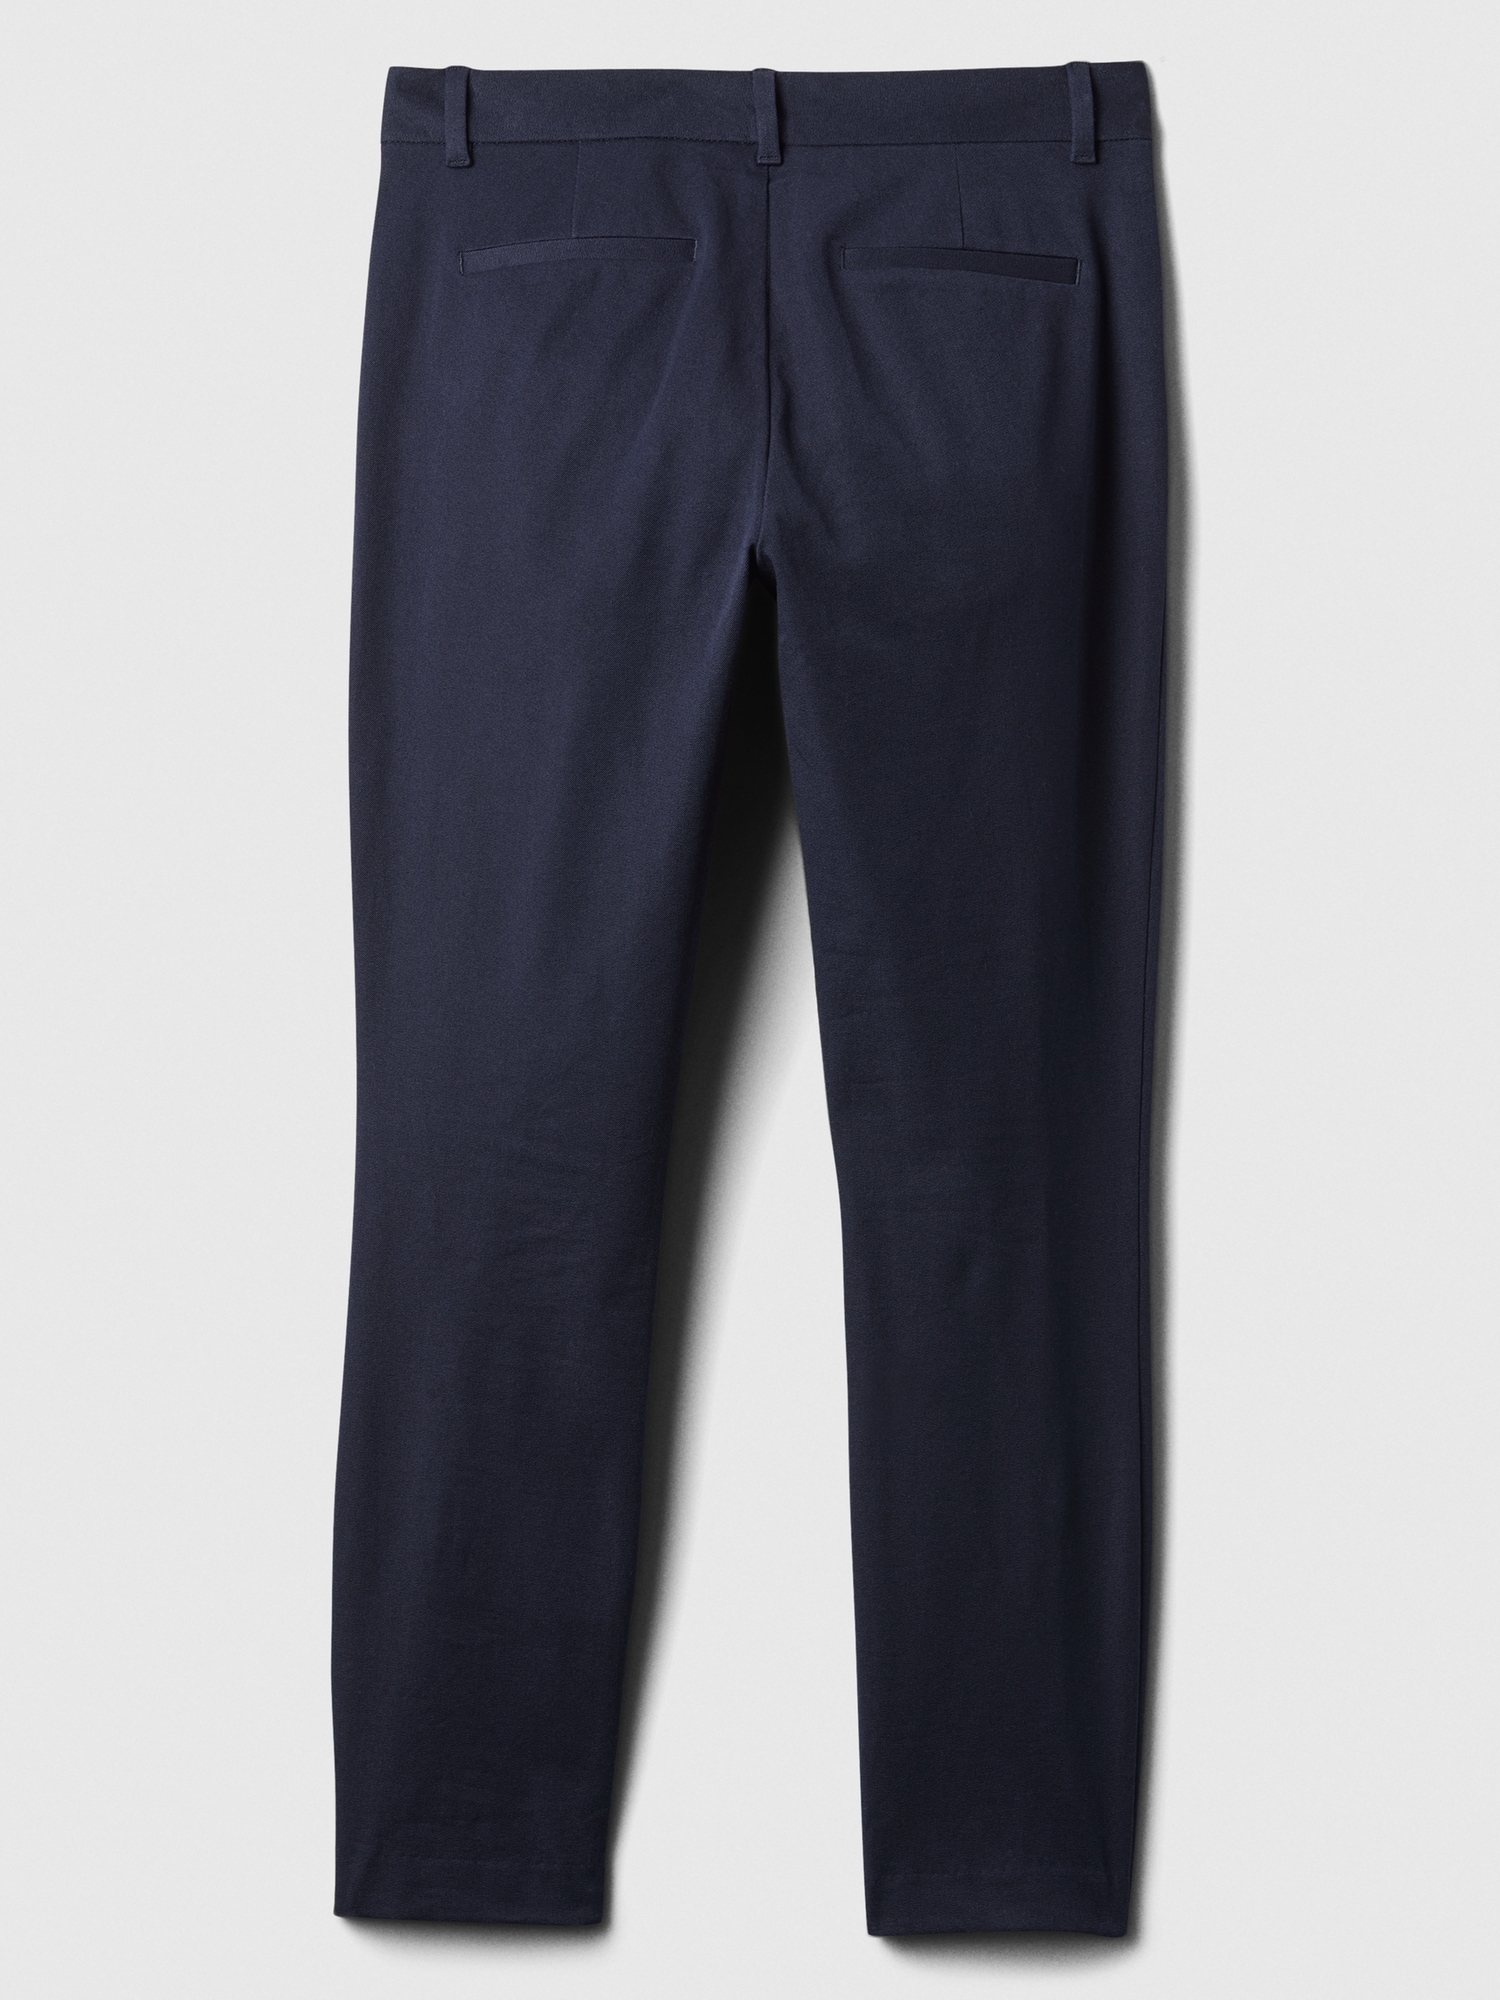 Stretchy lightweight ankle-length pants | GIORDANO Online Store